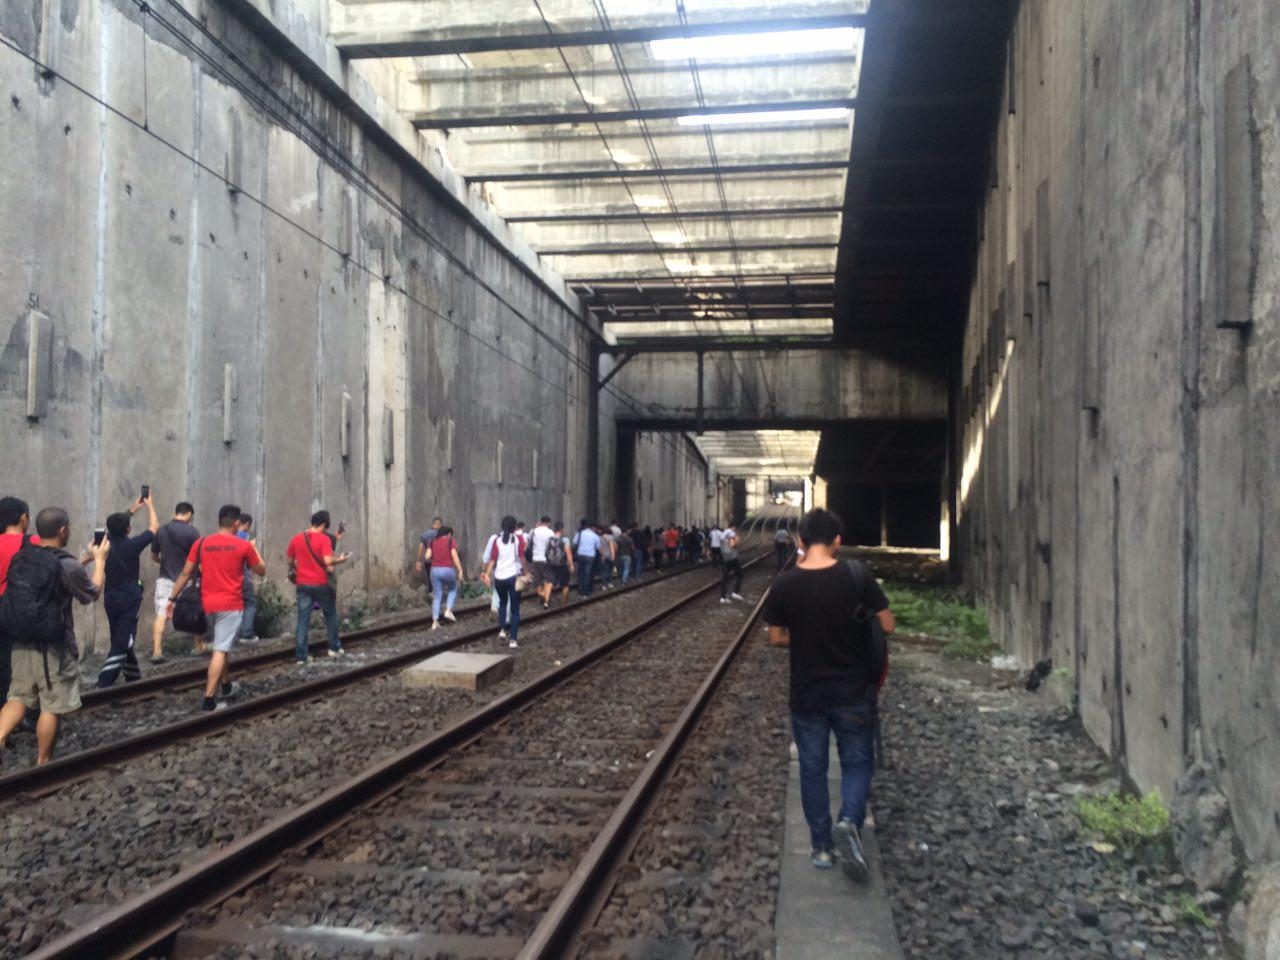 ‘Human intervention’ probed as possible cause of MRT3 train detachment